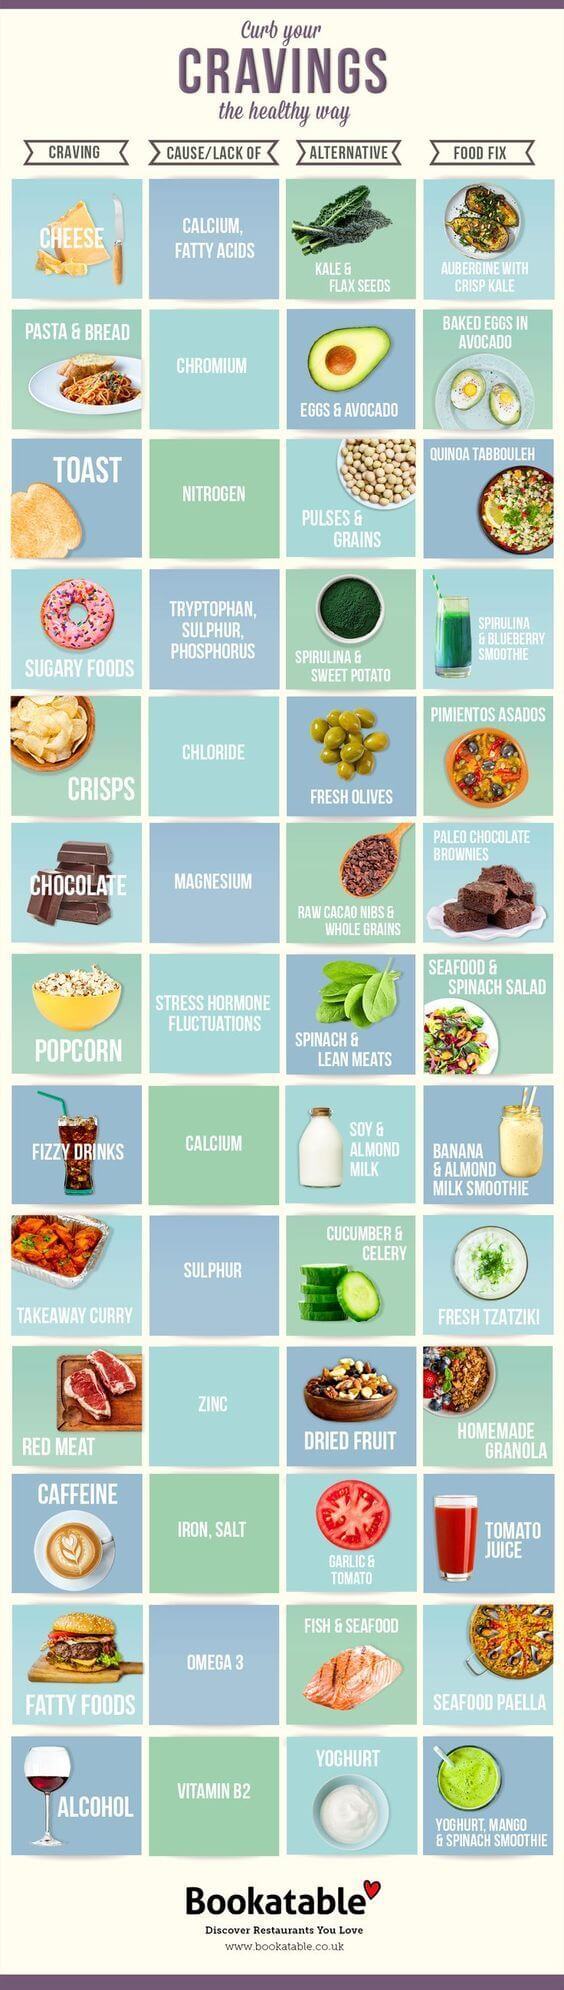 Curb Your Cravings the Healthy Way #Infographic